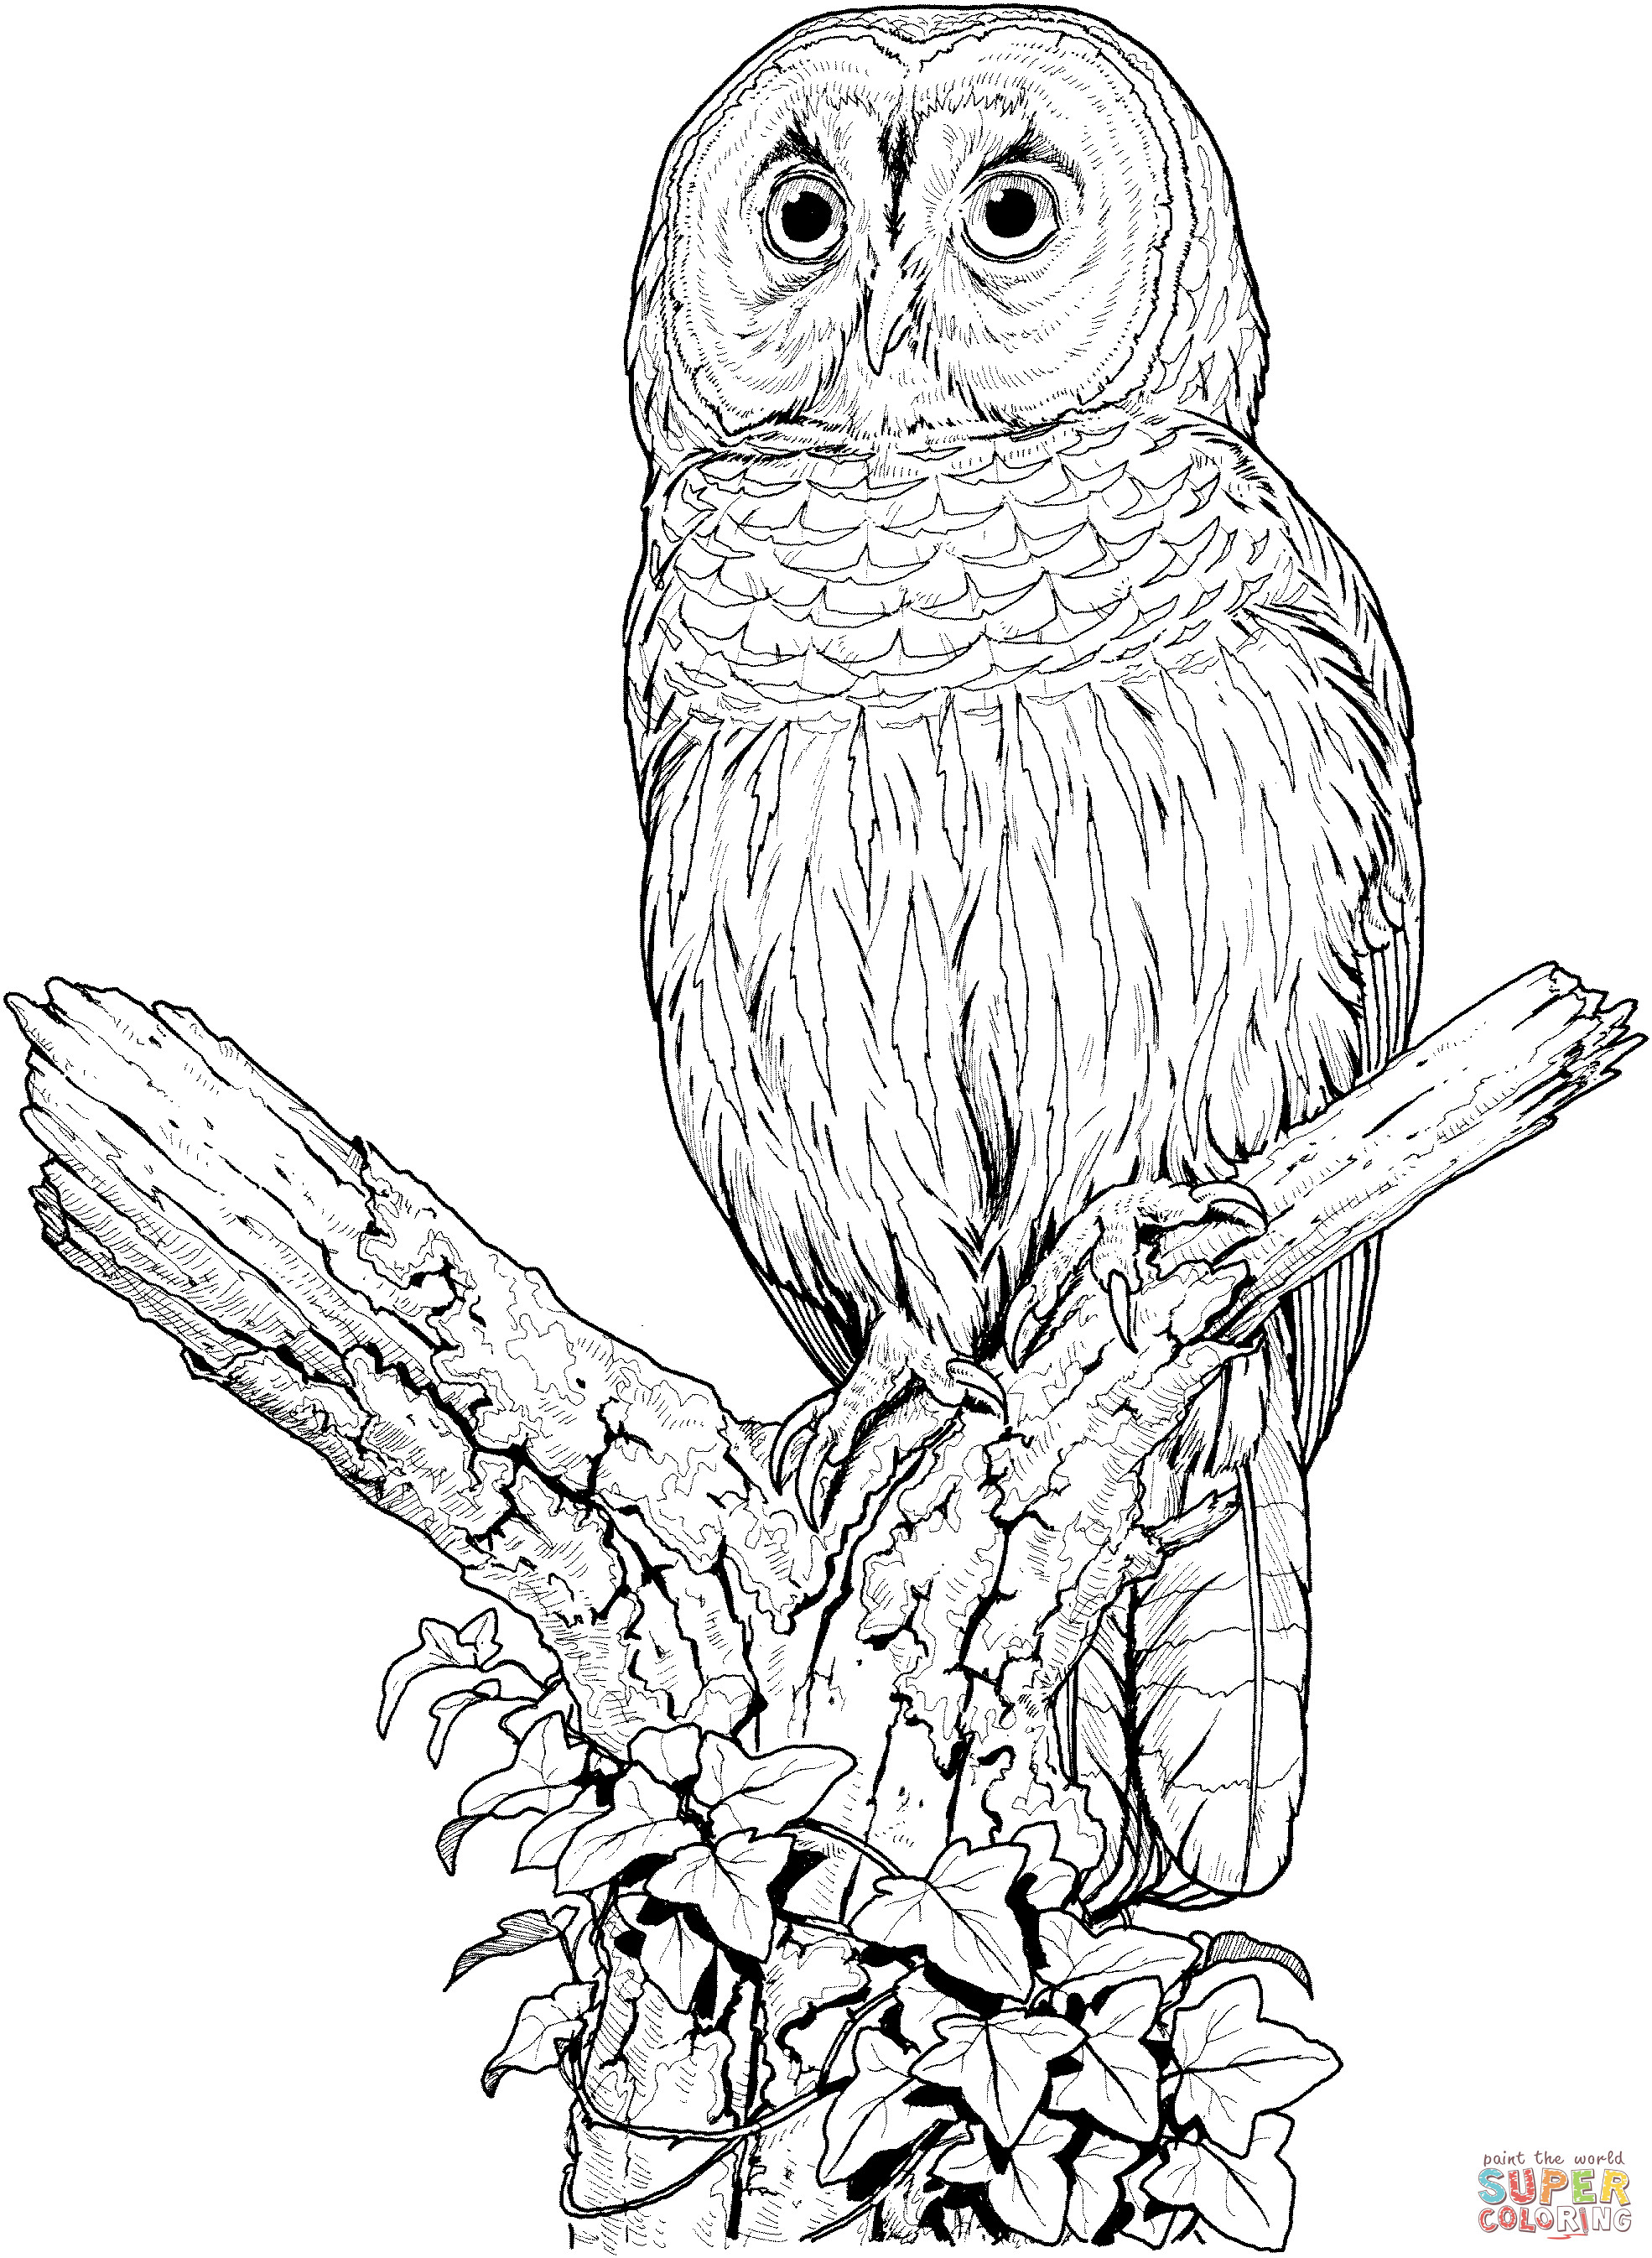 Owl Coloring Book Pages
 Owl Coloring Pages for Adults Bestofcoloring